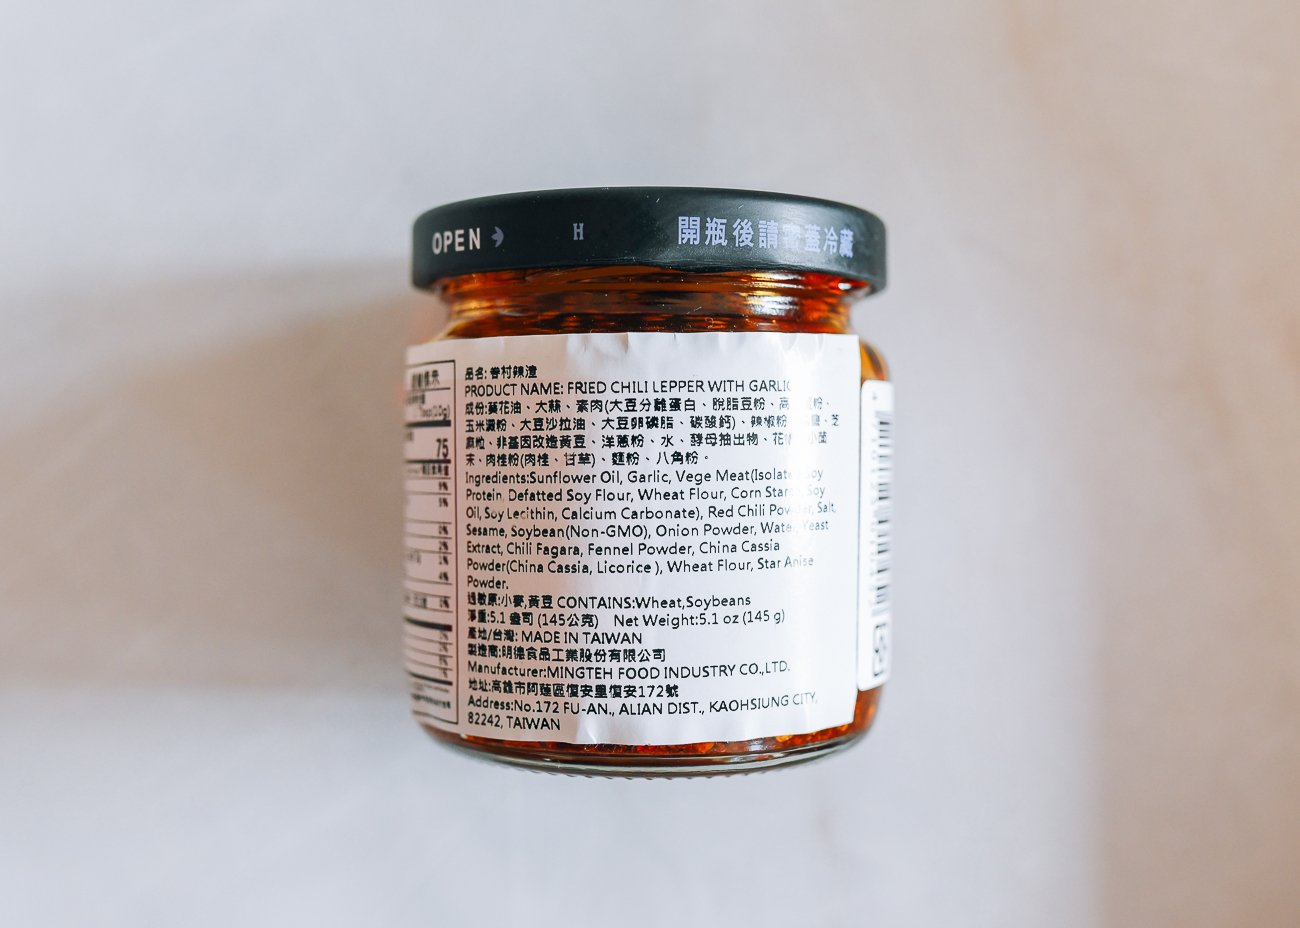 Mingde Fried Chili Pepper with Garlic Ingredients Label